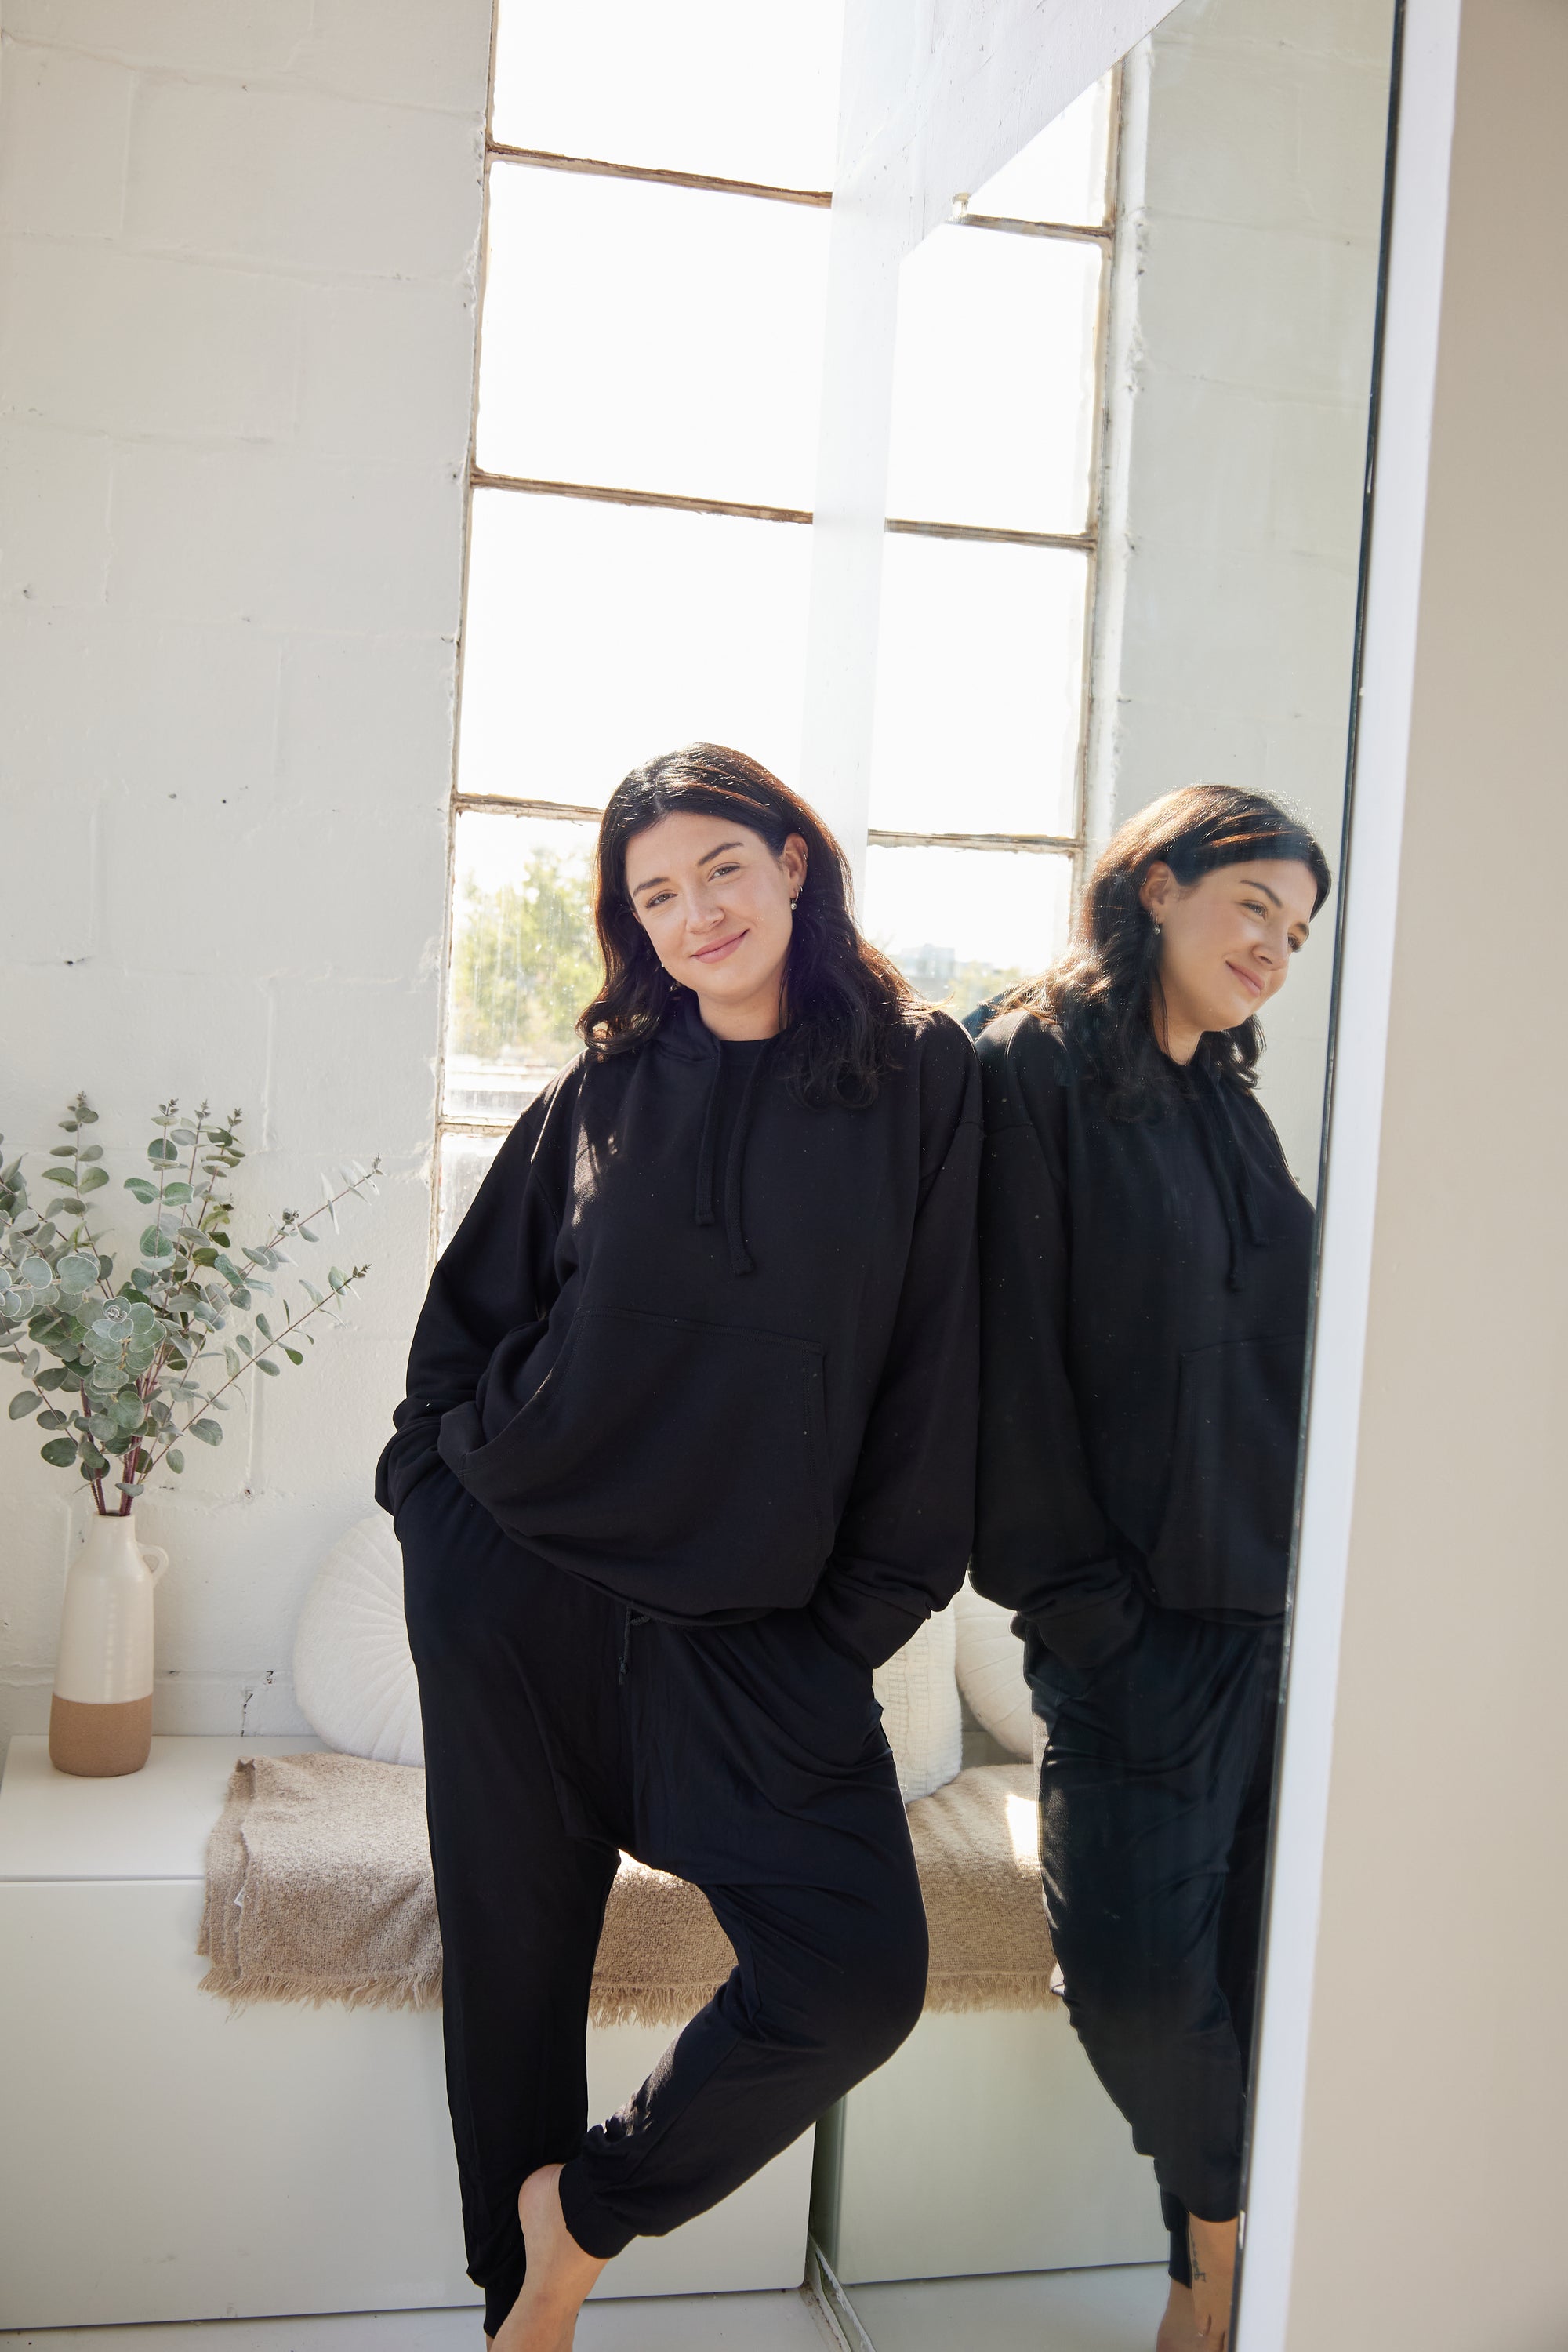 The Black Hoodie by Cassandra Elizabeth is an ethically made, minimalist wardrobe essential, and is the epitome of quiet luxury.